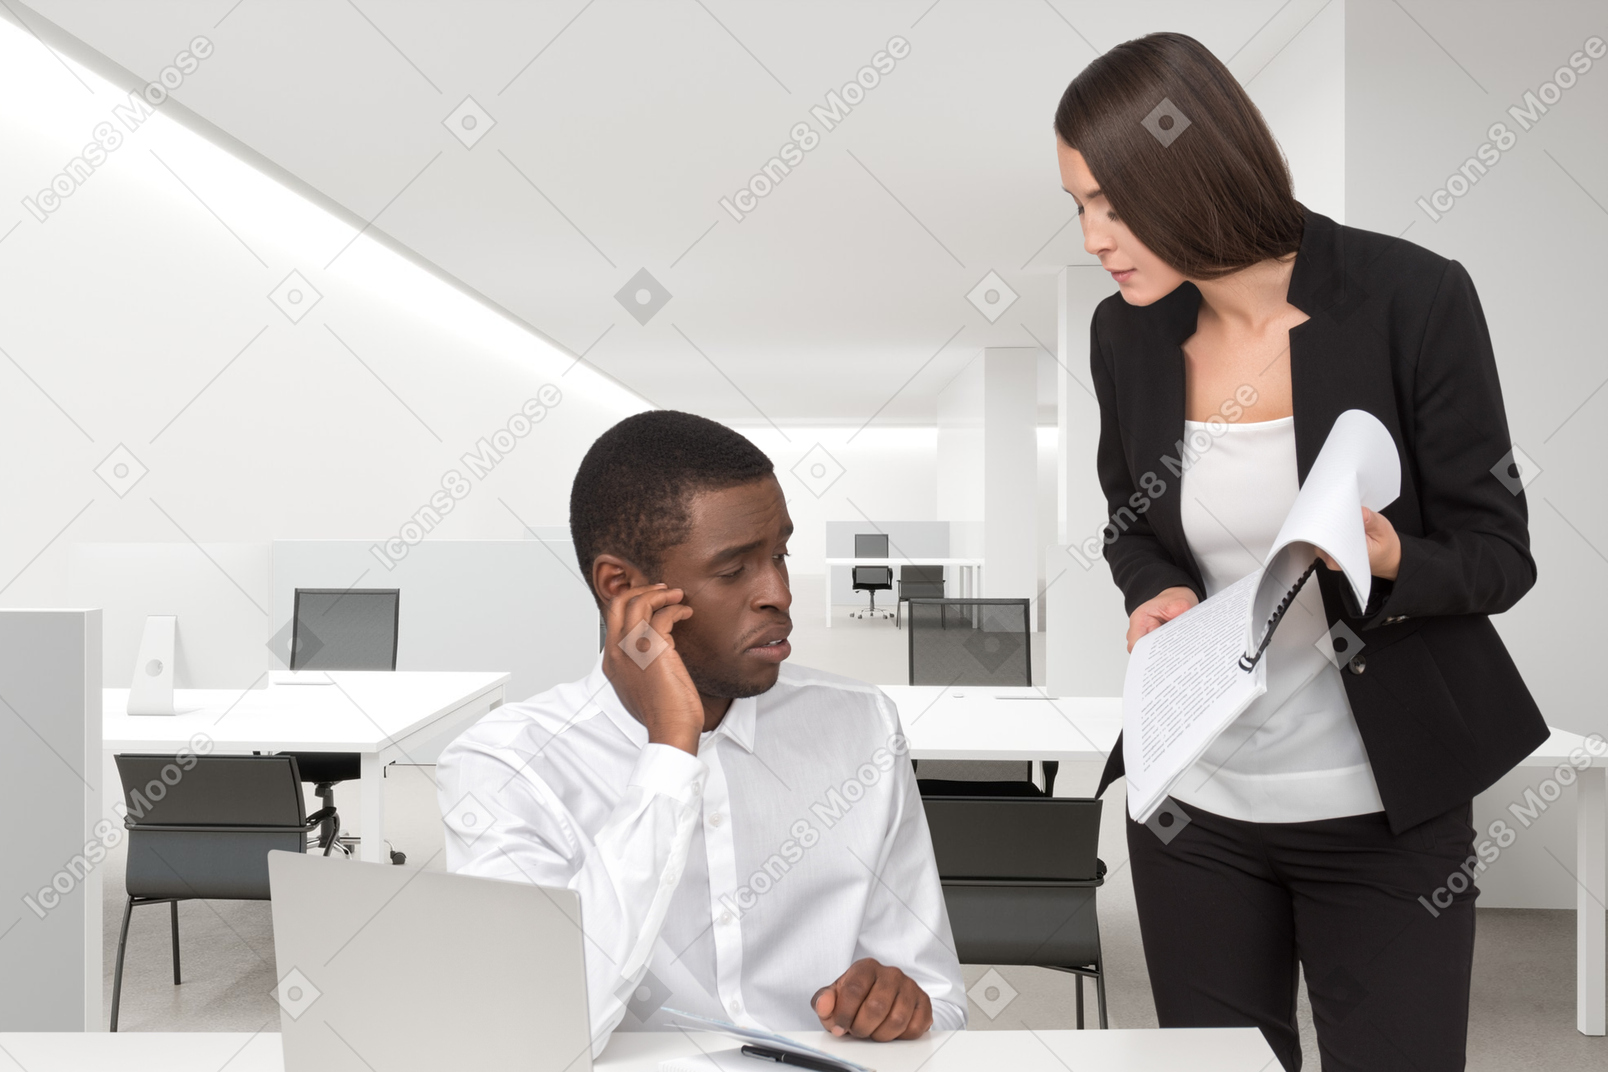 Female boss asking employee about report